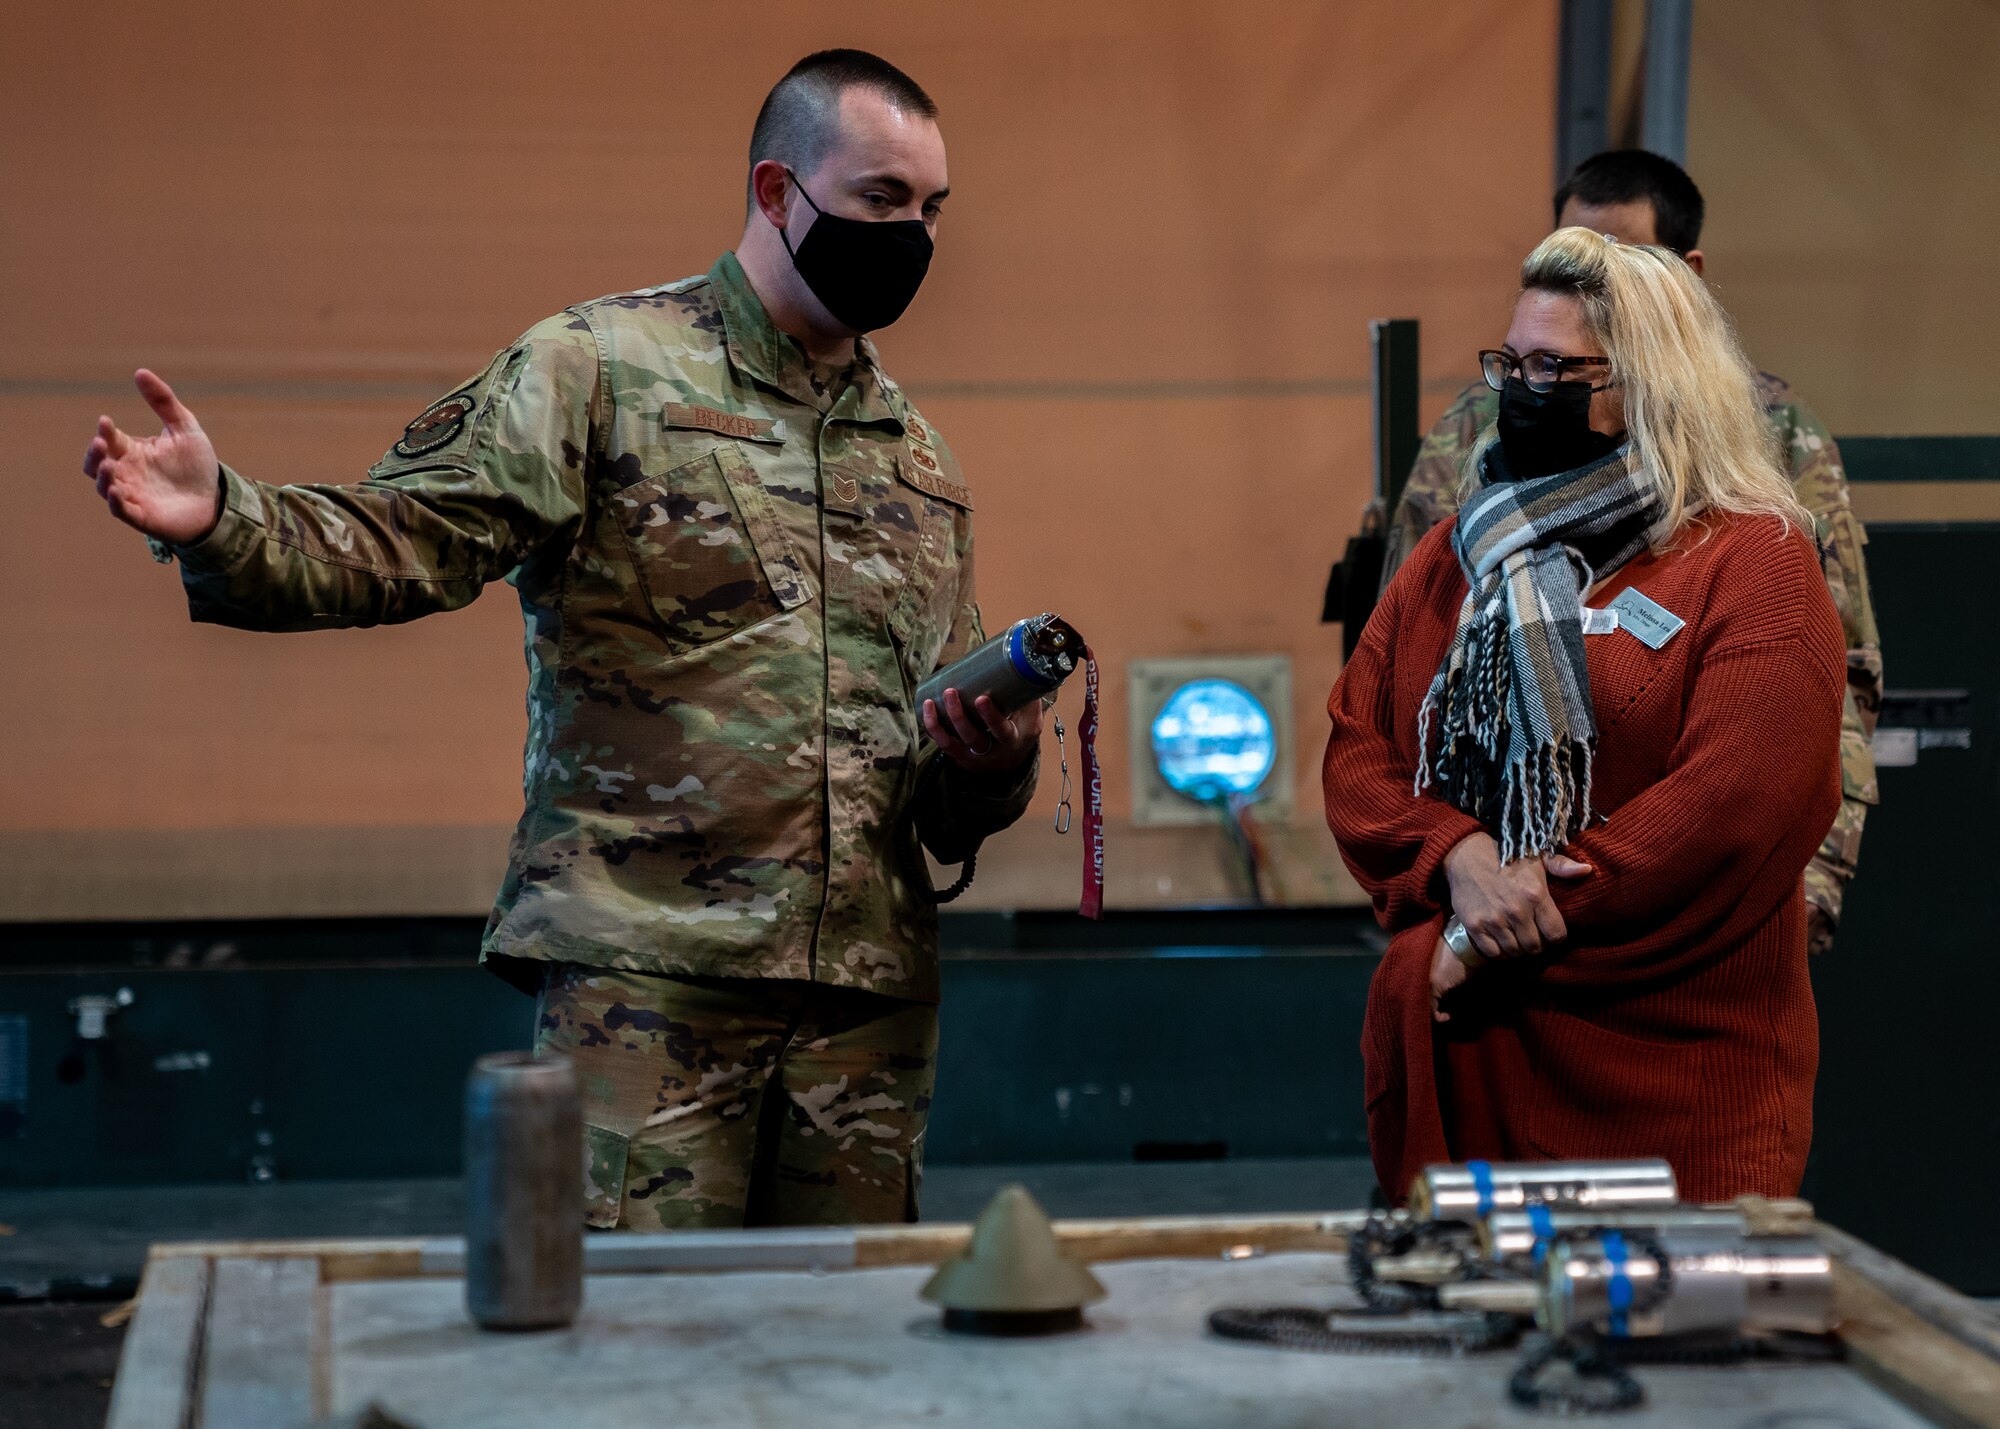 U.S. Air Force Tech. Sgt. Collin Becker, 3rd Munitions Squadron shop chief, plans and scheduling, explains munition components to Melissa Lea, 3rd Wing key spouse, during an immersion at Joint Base Elmendorf-Richardson, Alaska, Oct. 14, 2021. The immersion gave key spouses an opportunity to see the 3rd Wing’s operations, educating and recognizing them as key components of the wing’s mission. (U.S. Air Force photo by Senior Airman Justin Wynn)